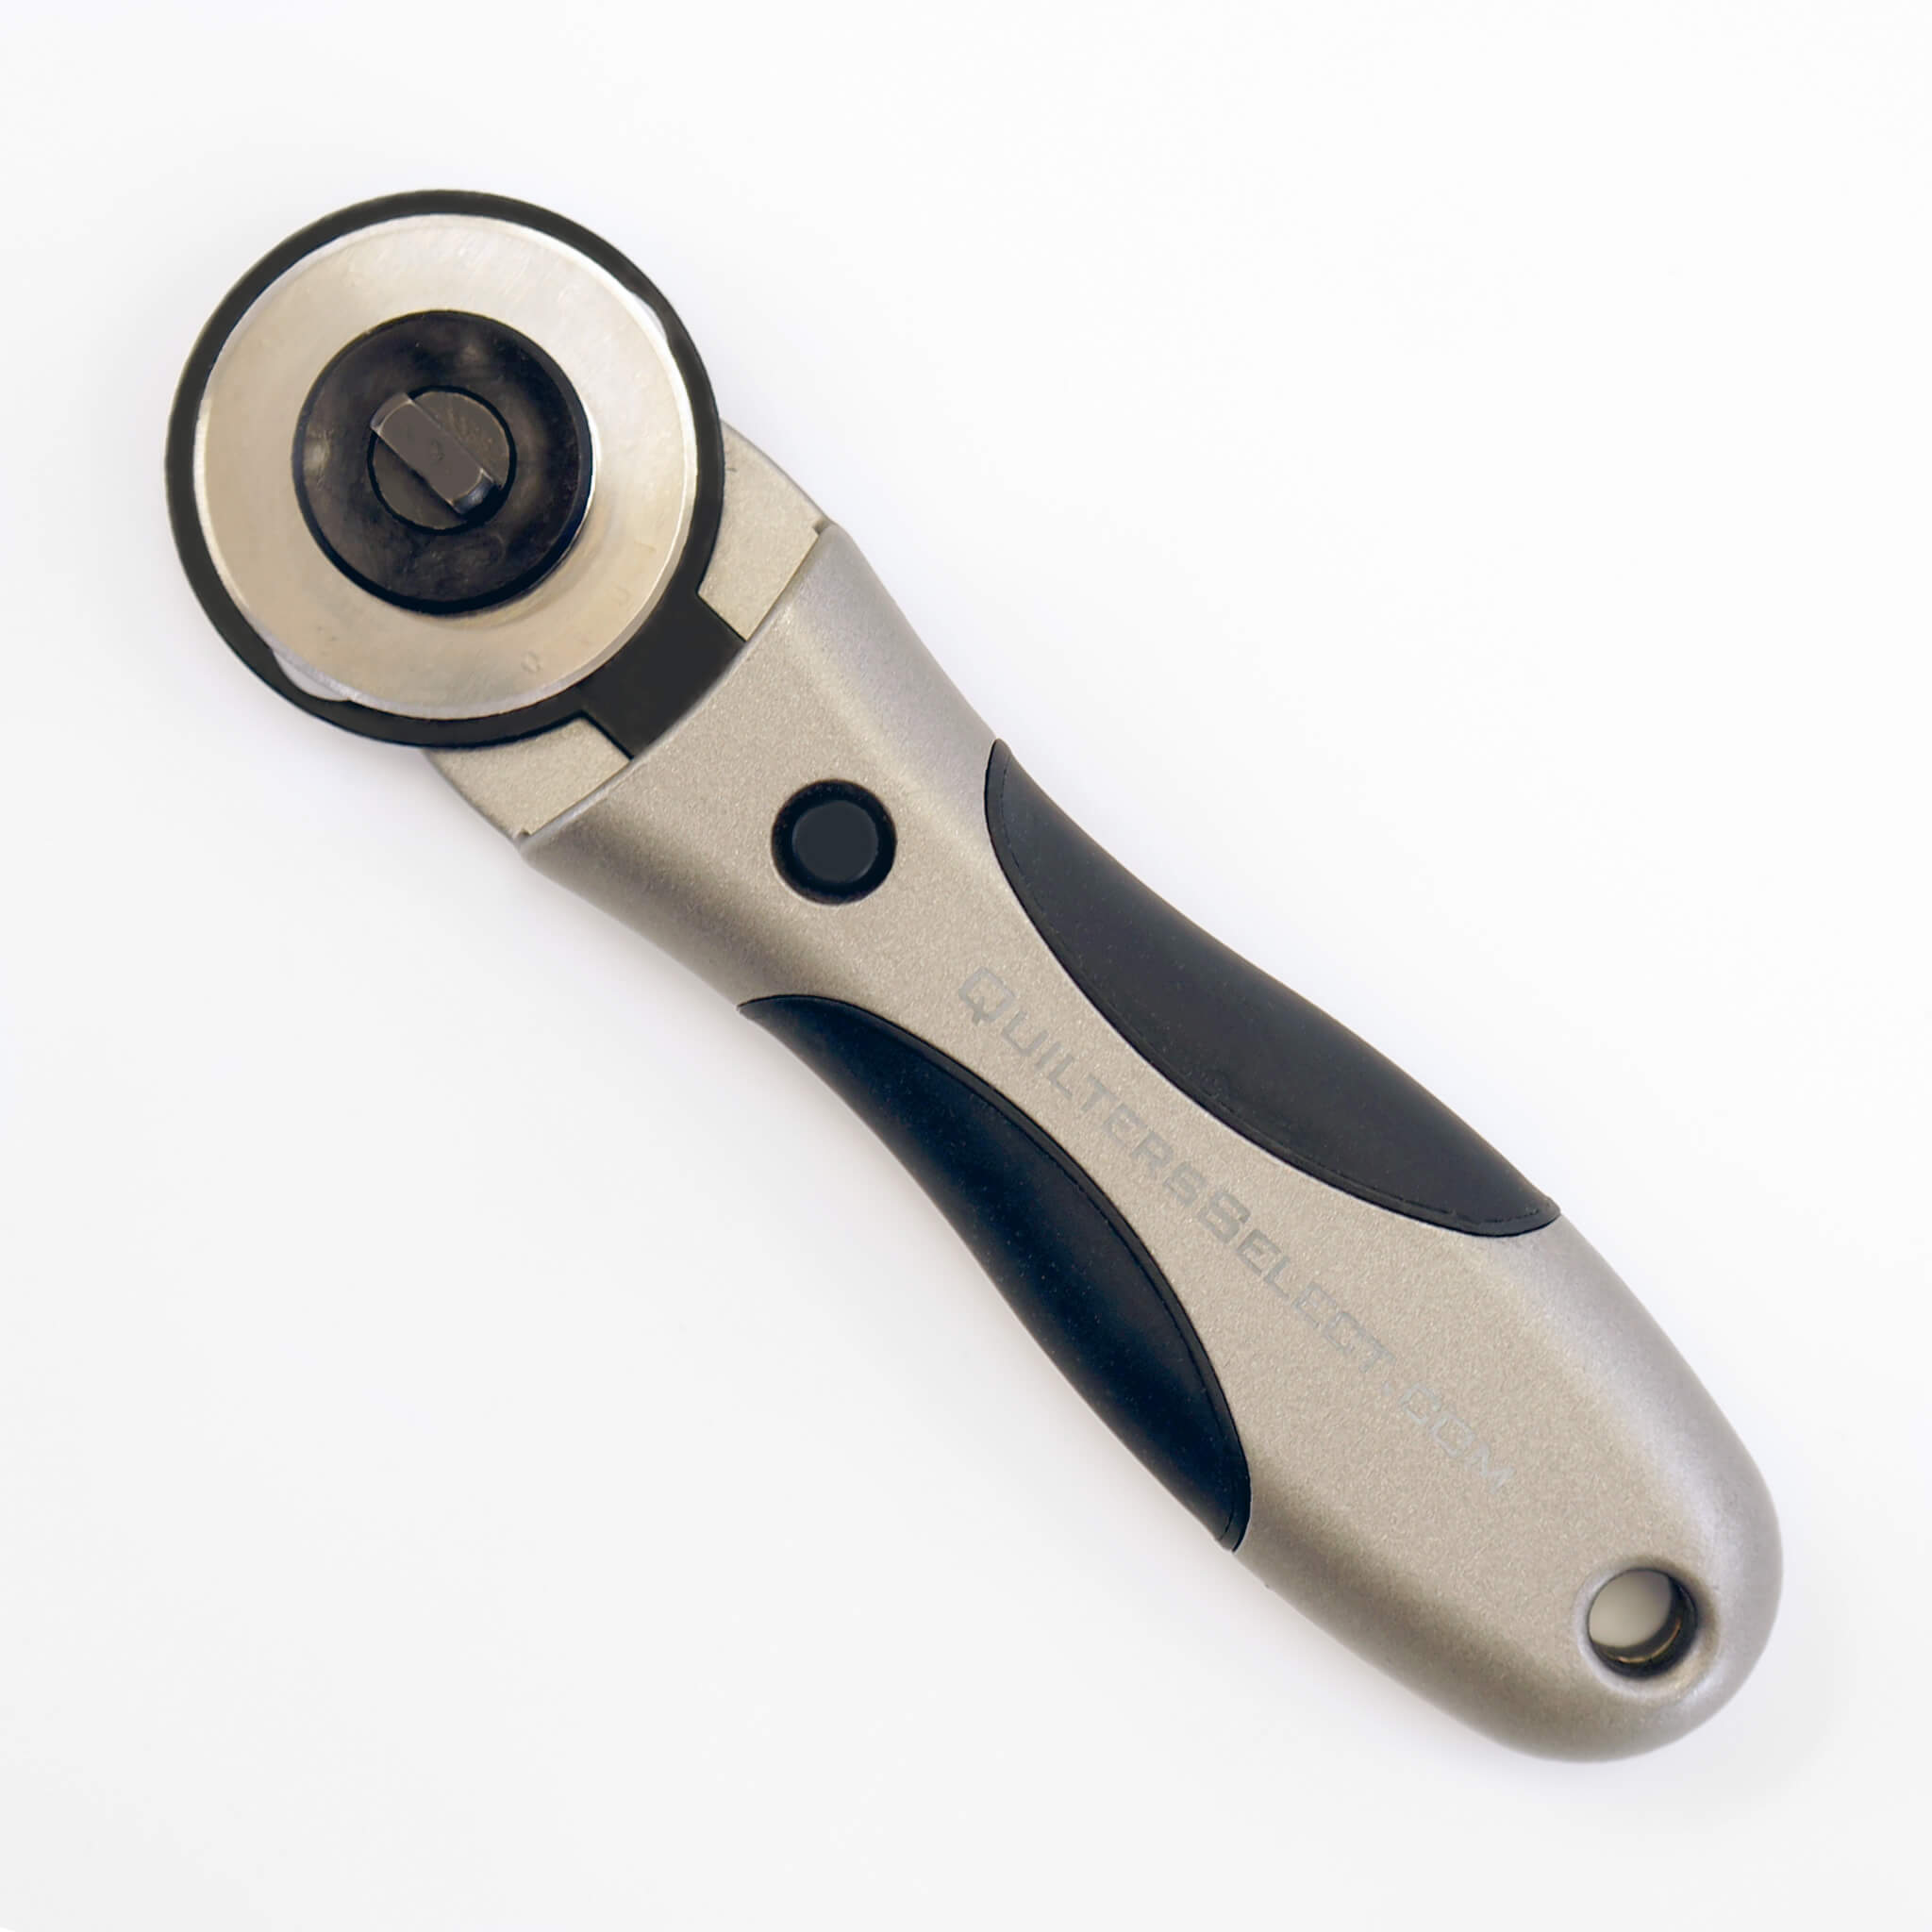 60mm Rotary Cutter - Ergonomic Rotary Cutter by Quilters Select